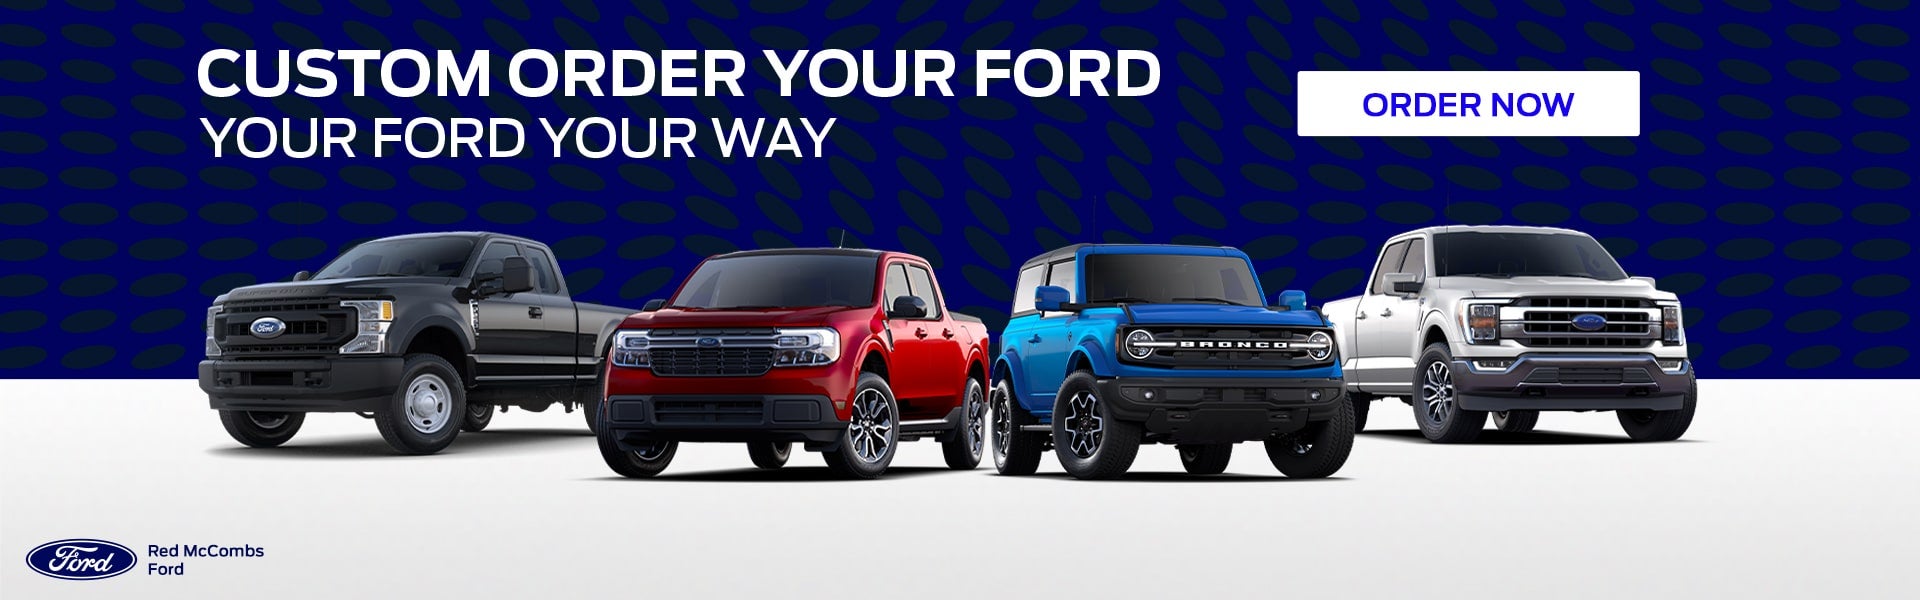 Custom Order Your Ford - Your Ford Your Way